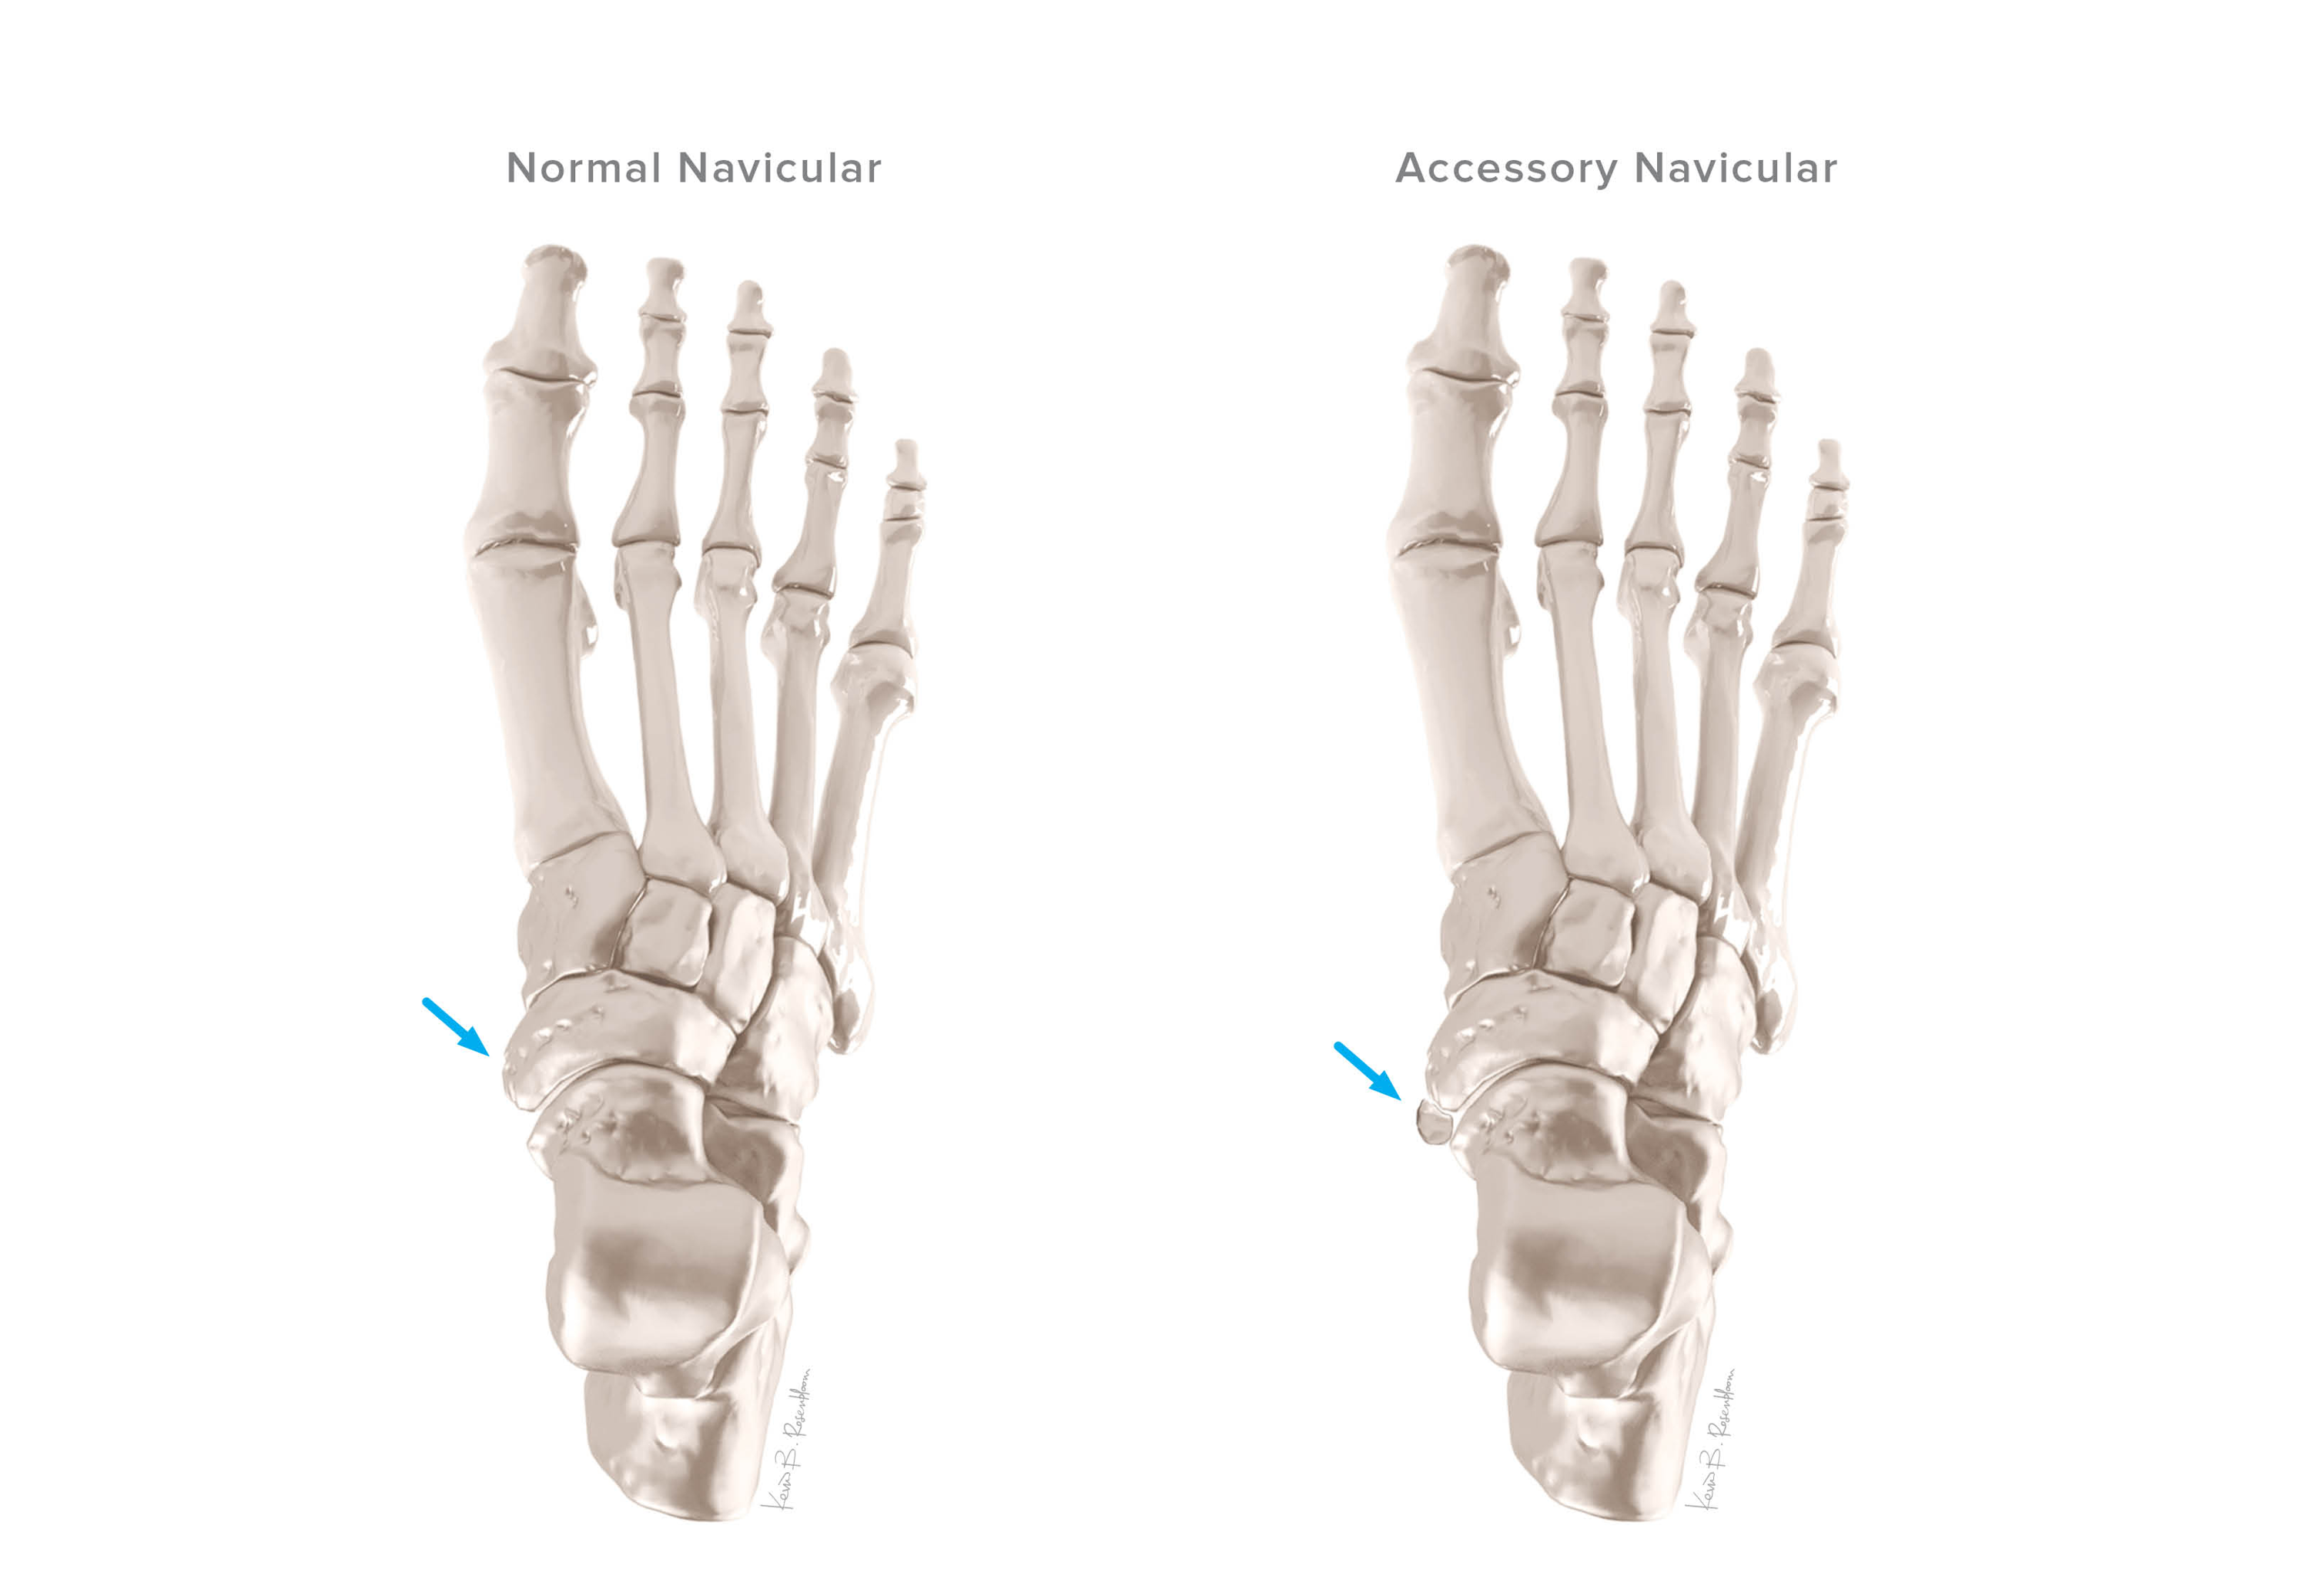 Accessory Navicular Syndrome